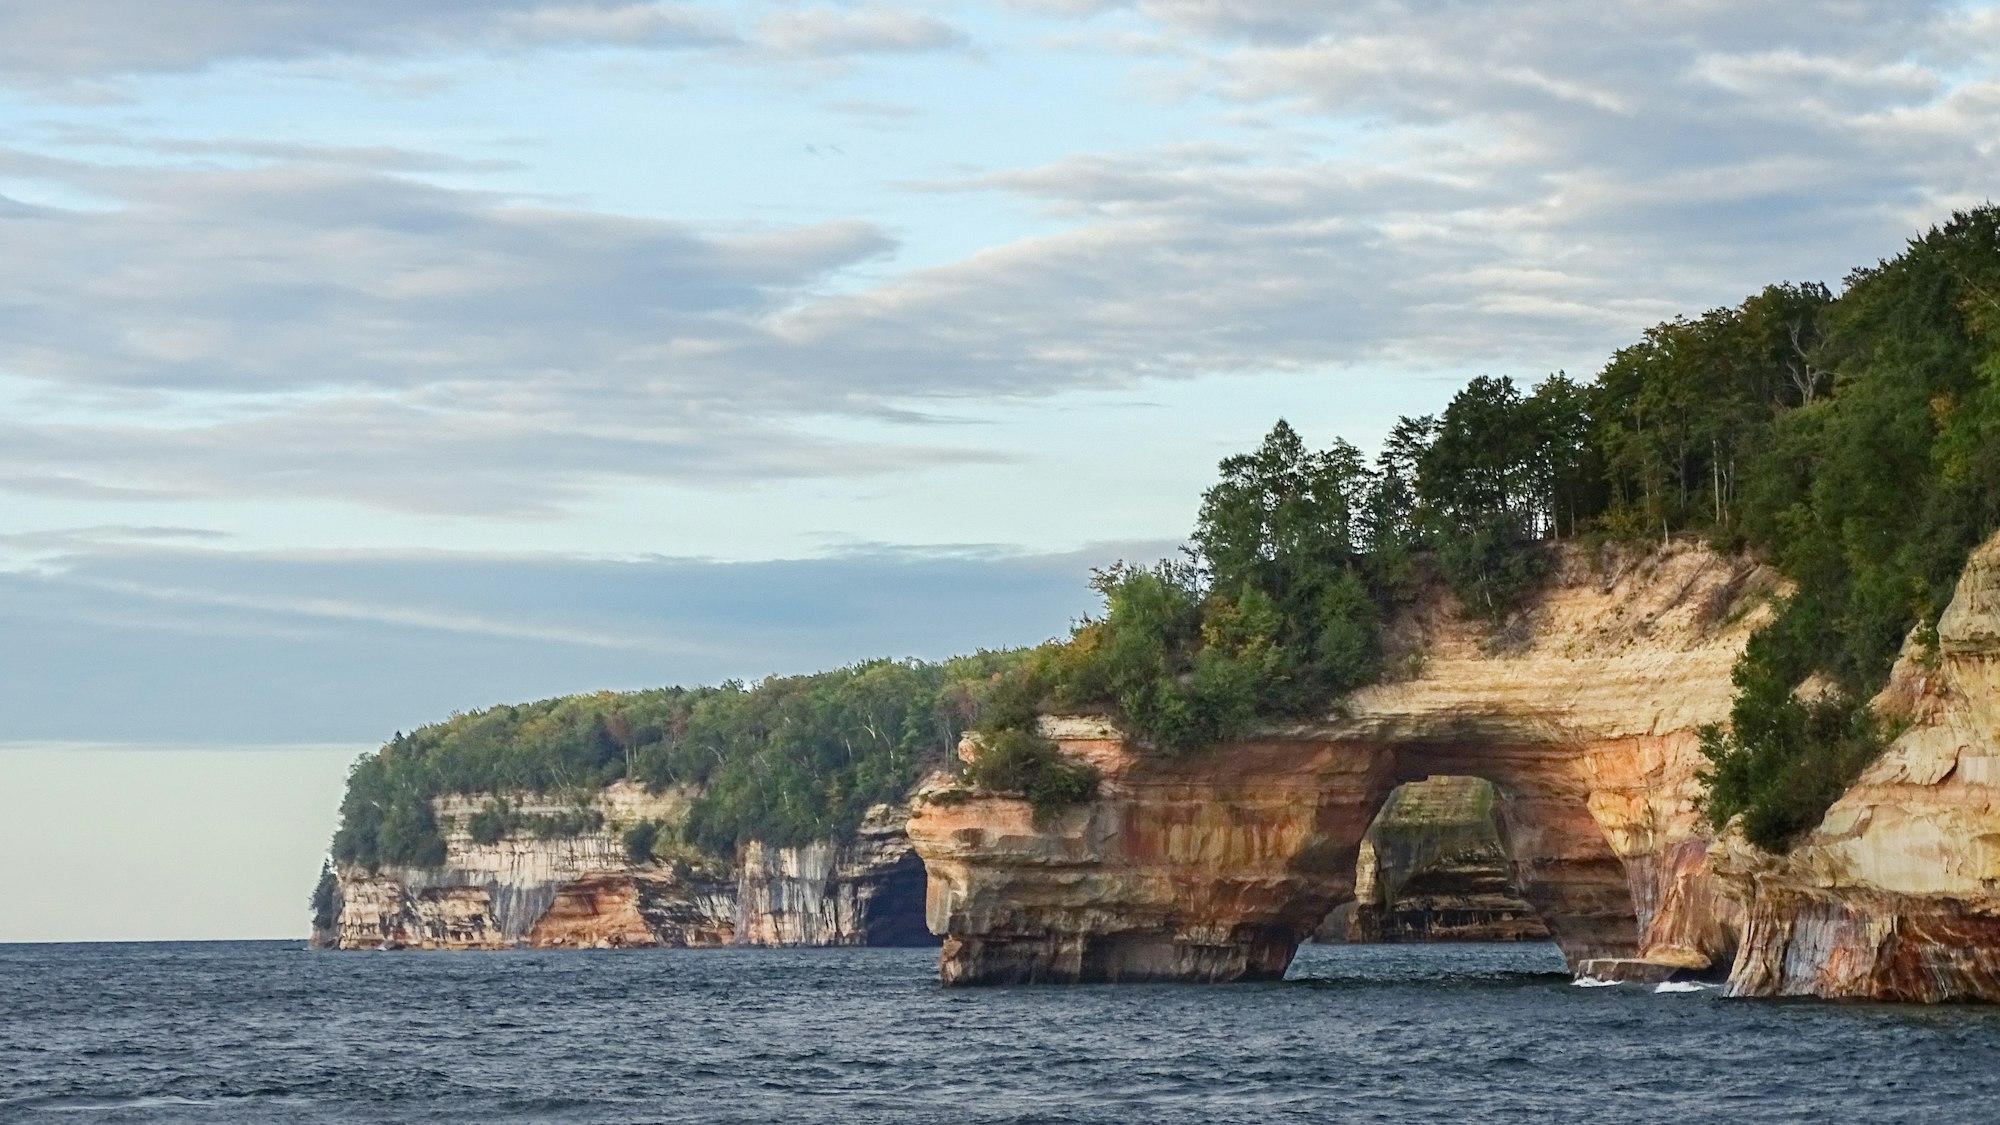 View of Pictured Rocks from a boat in Lake Superior. 30 September 2016. Photo taken by Rocky Friz.